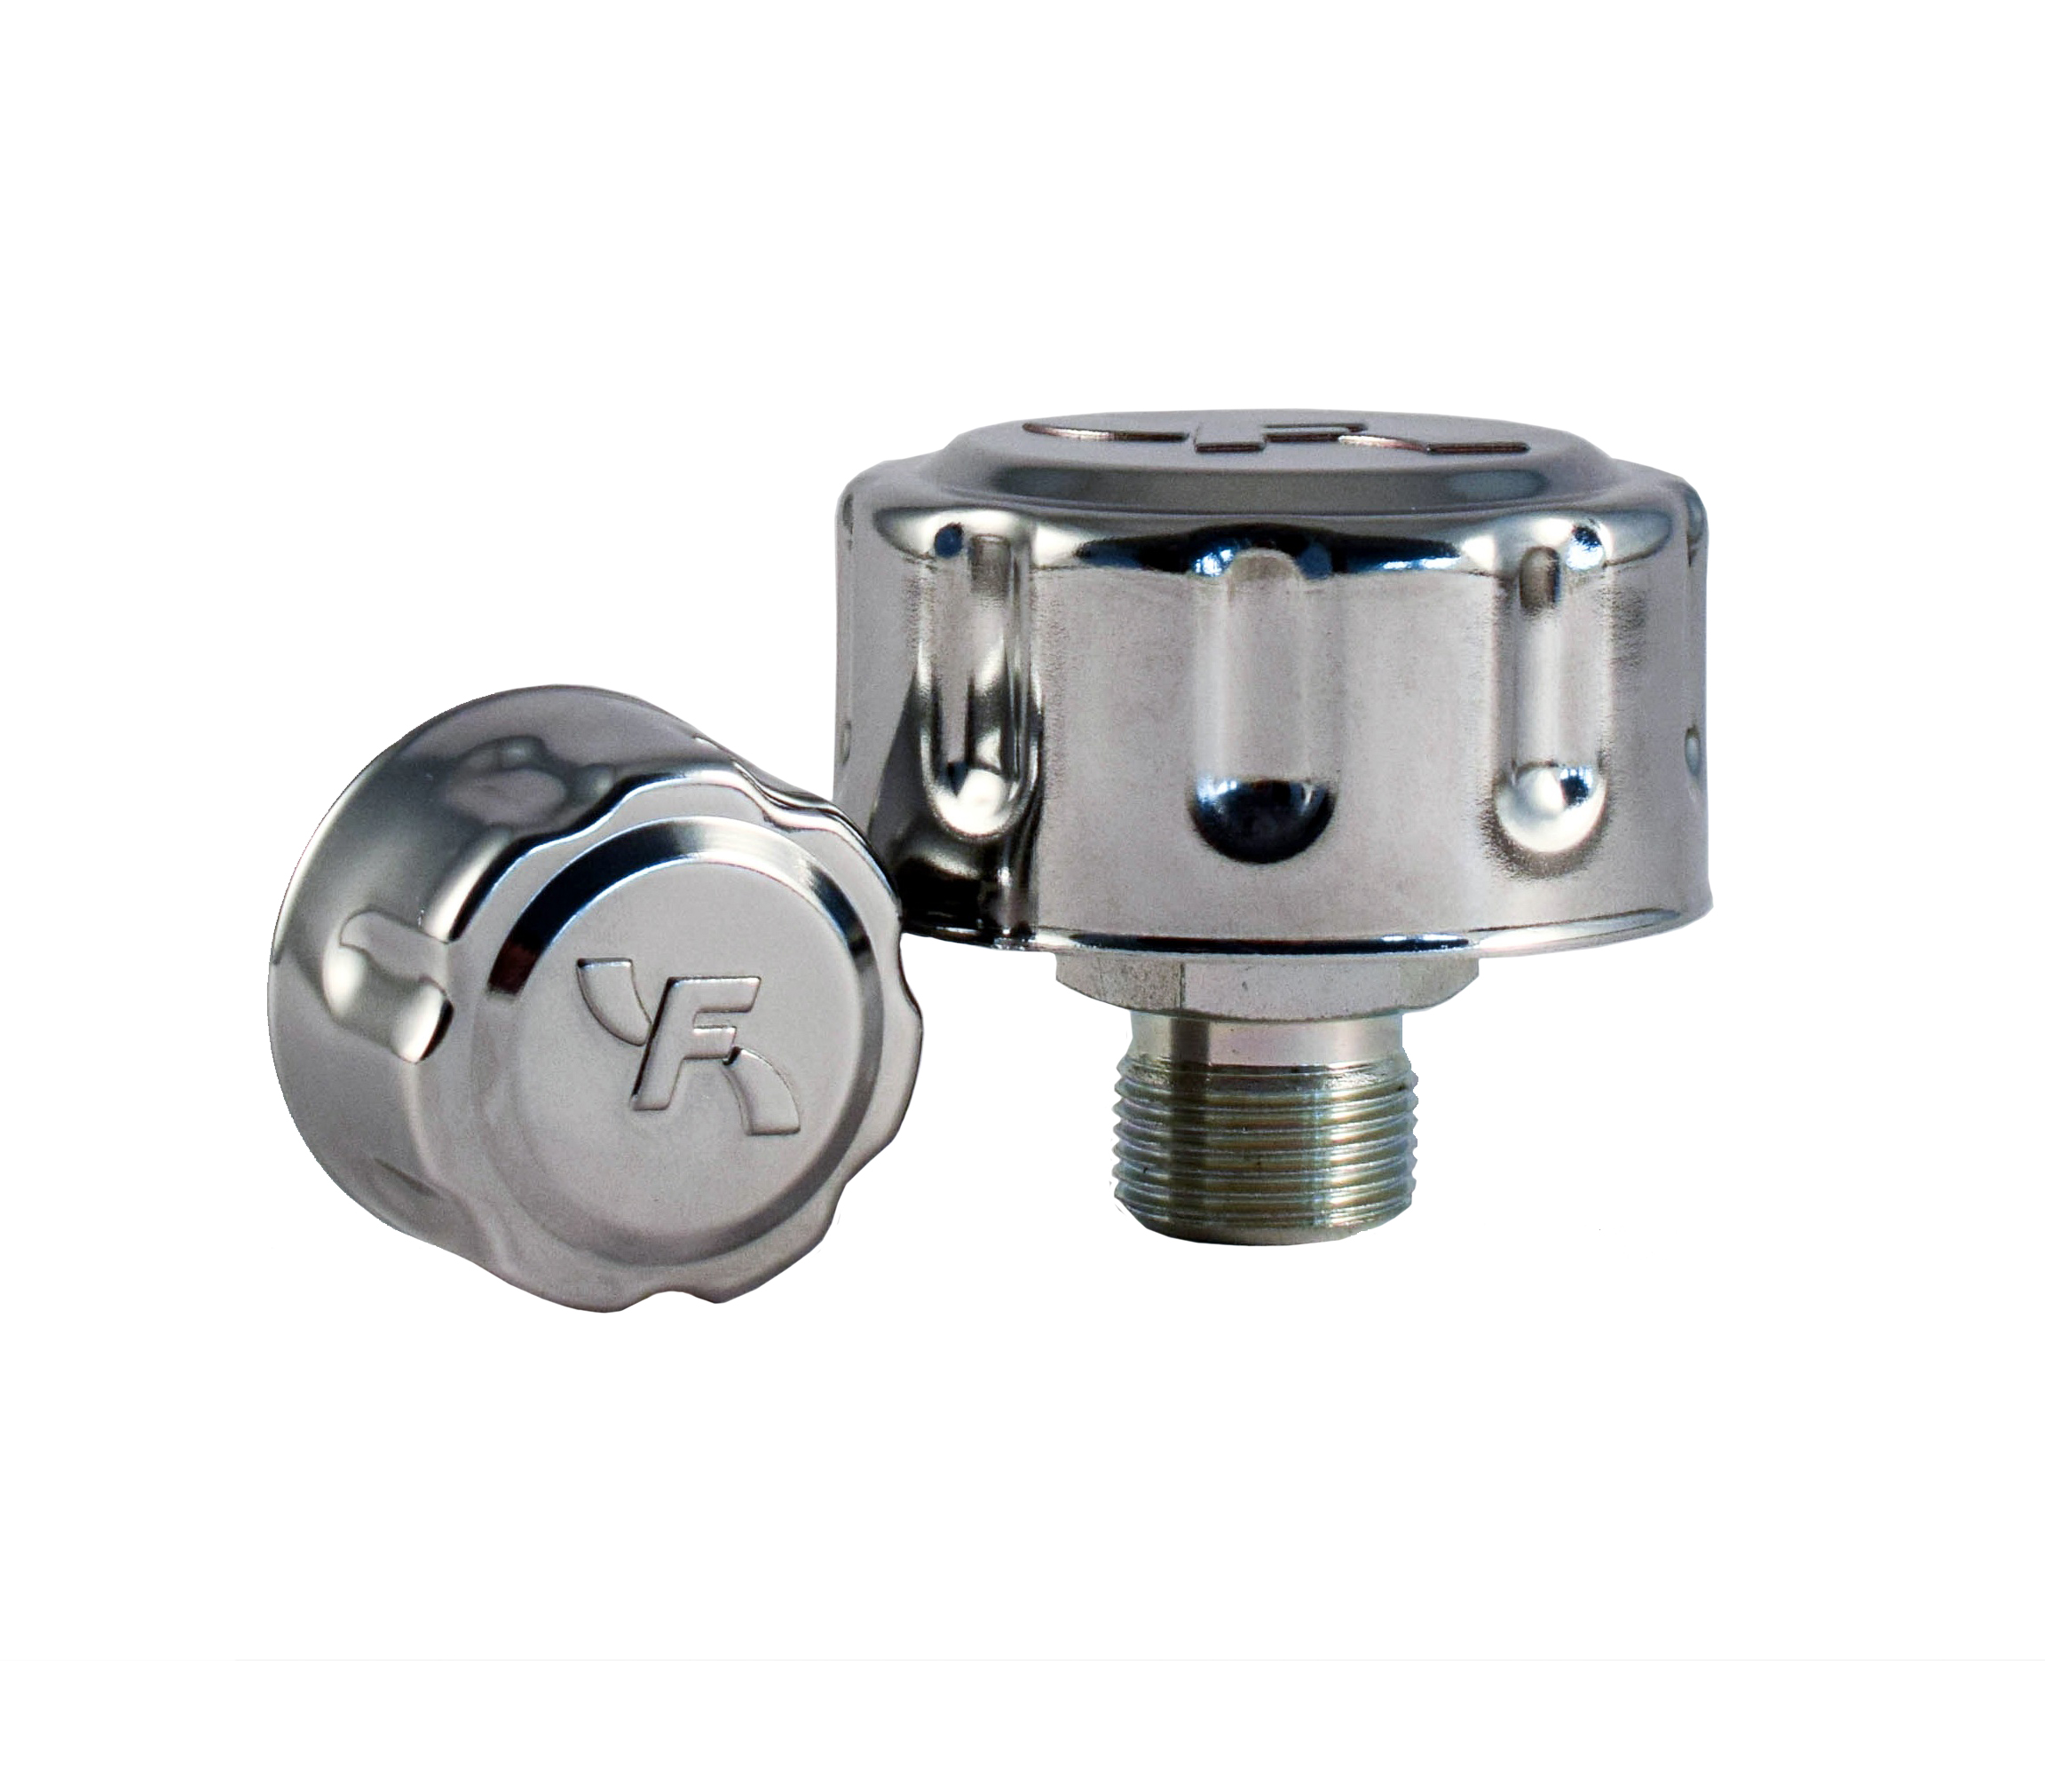 Threaded Breather, Cap Only, 1/4" BSP, 3 Micron, No Pressure Valve